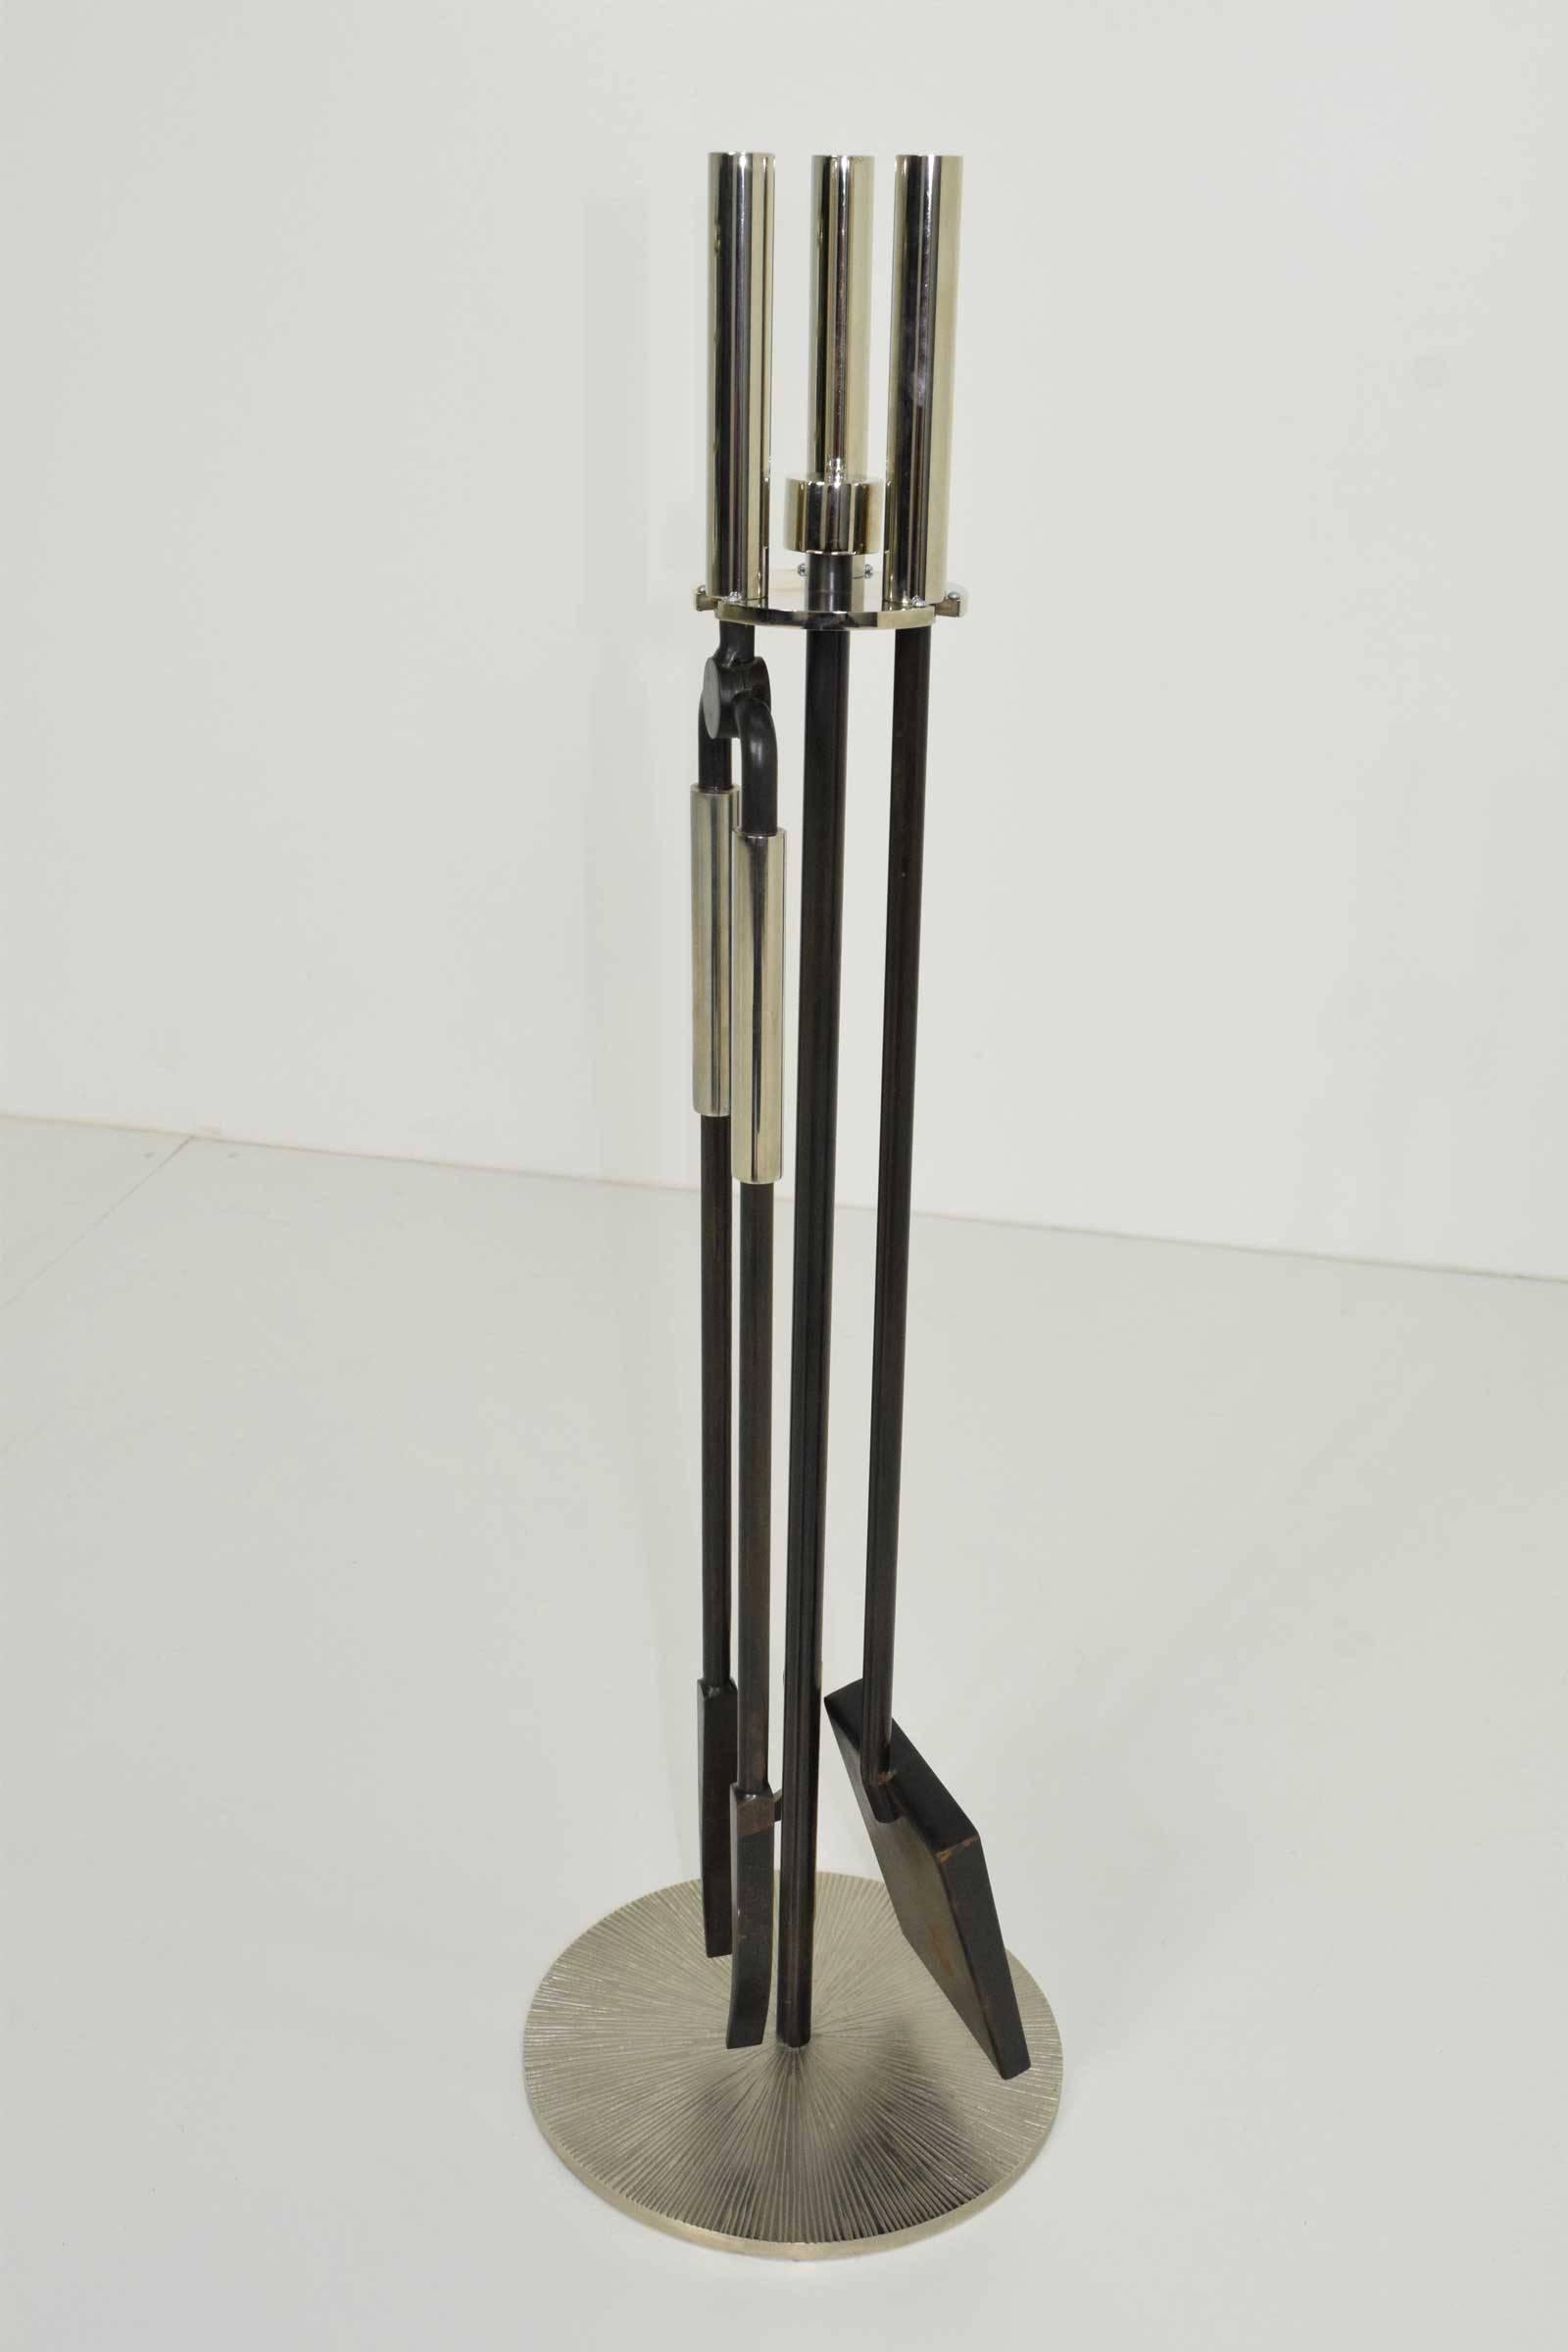 Beautiful Tuell & Reynolds fireplace tool set in bronze and polished nickel.